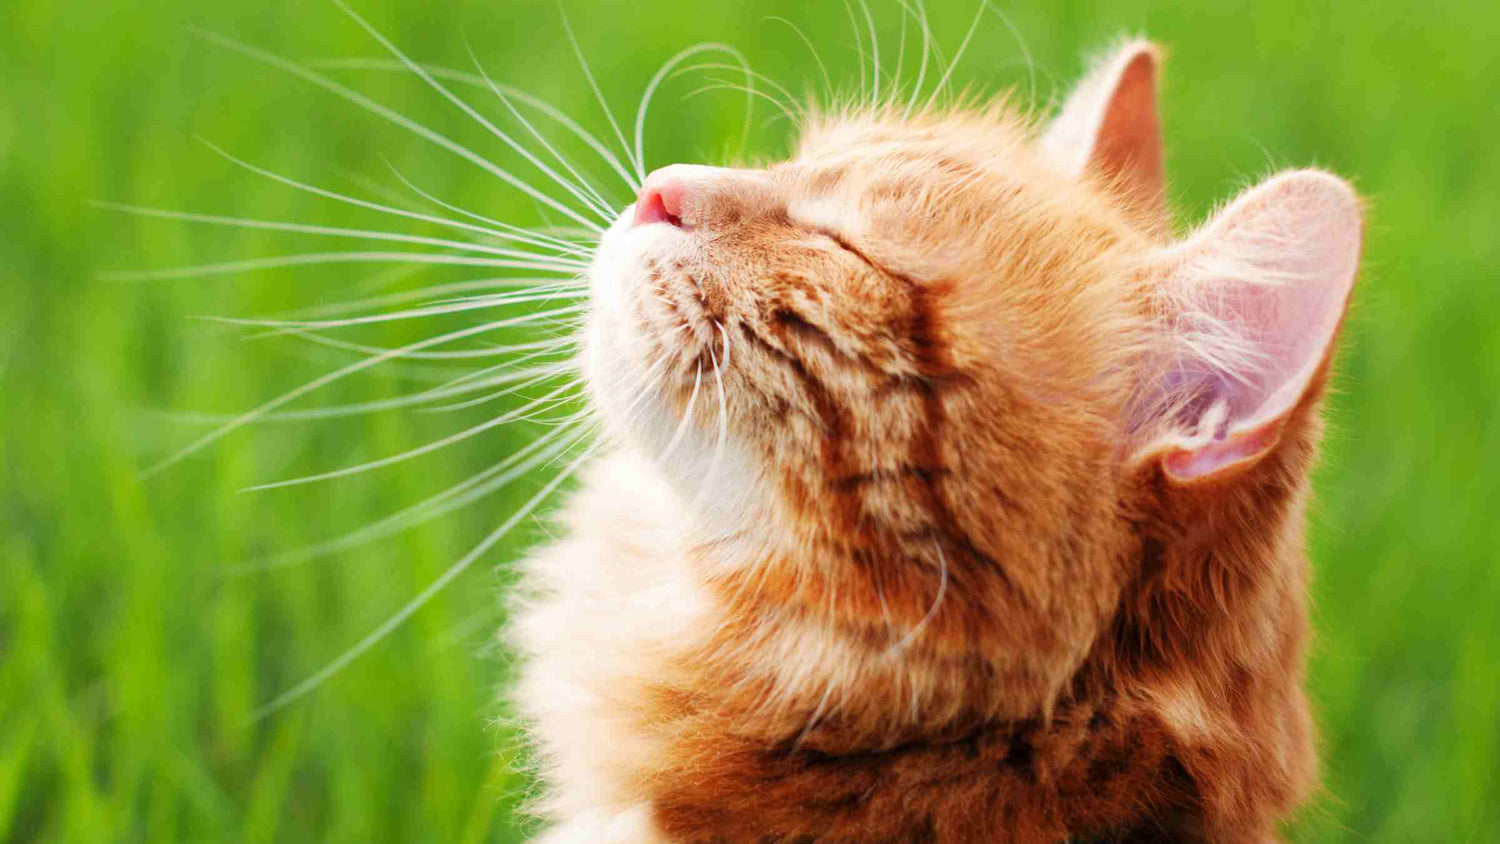 Orange cat enjoying the calm of being outside in the sun and grass, embodying a holistic lifestyle.